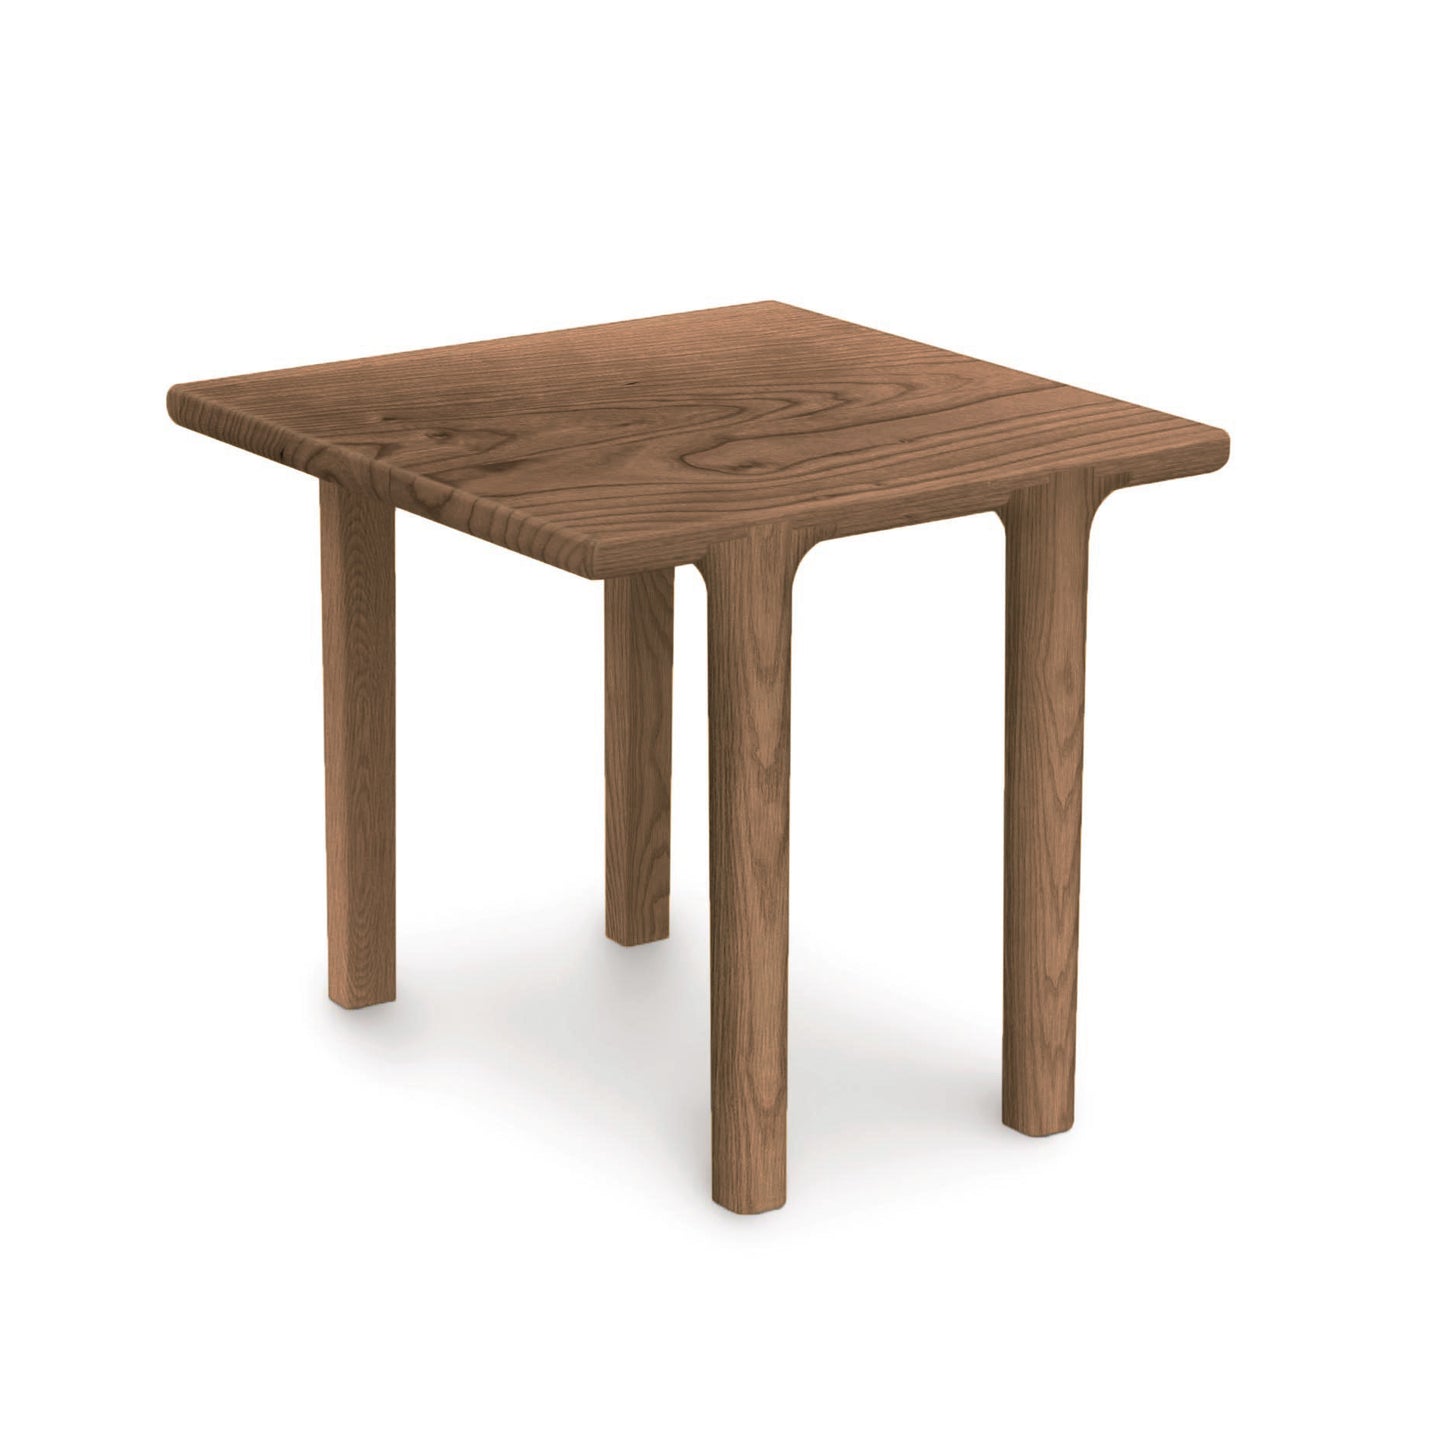 The Copeland Furniture Sierra Square End Table is a modern wooden table made from North American hardwood. It stands on two legs and is showcased against a clean white background.